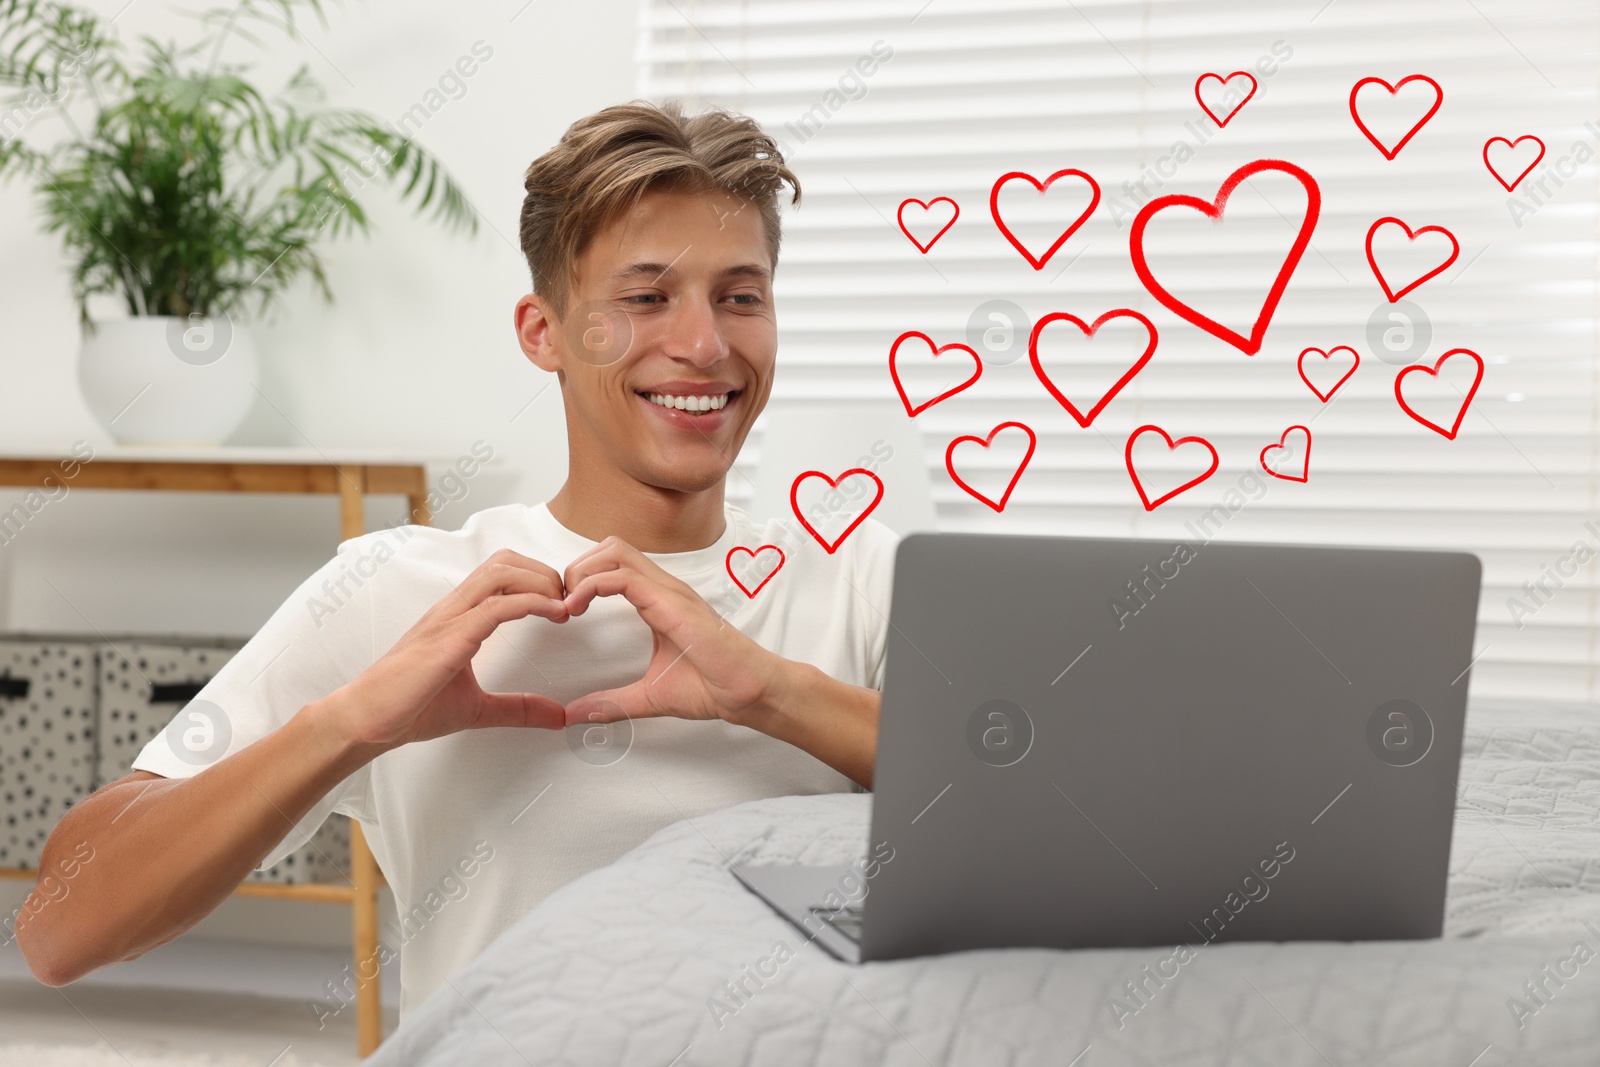 Image of Long distance relationship. Young man having video chat with his loved one indoors. Red hearts near him